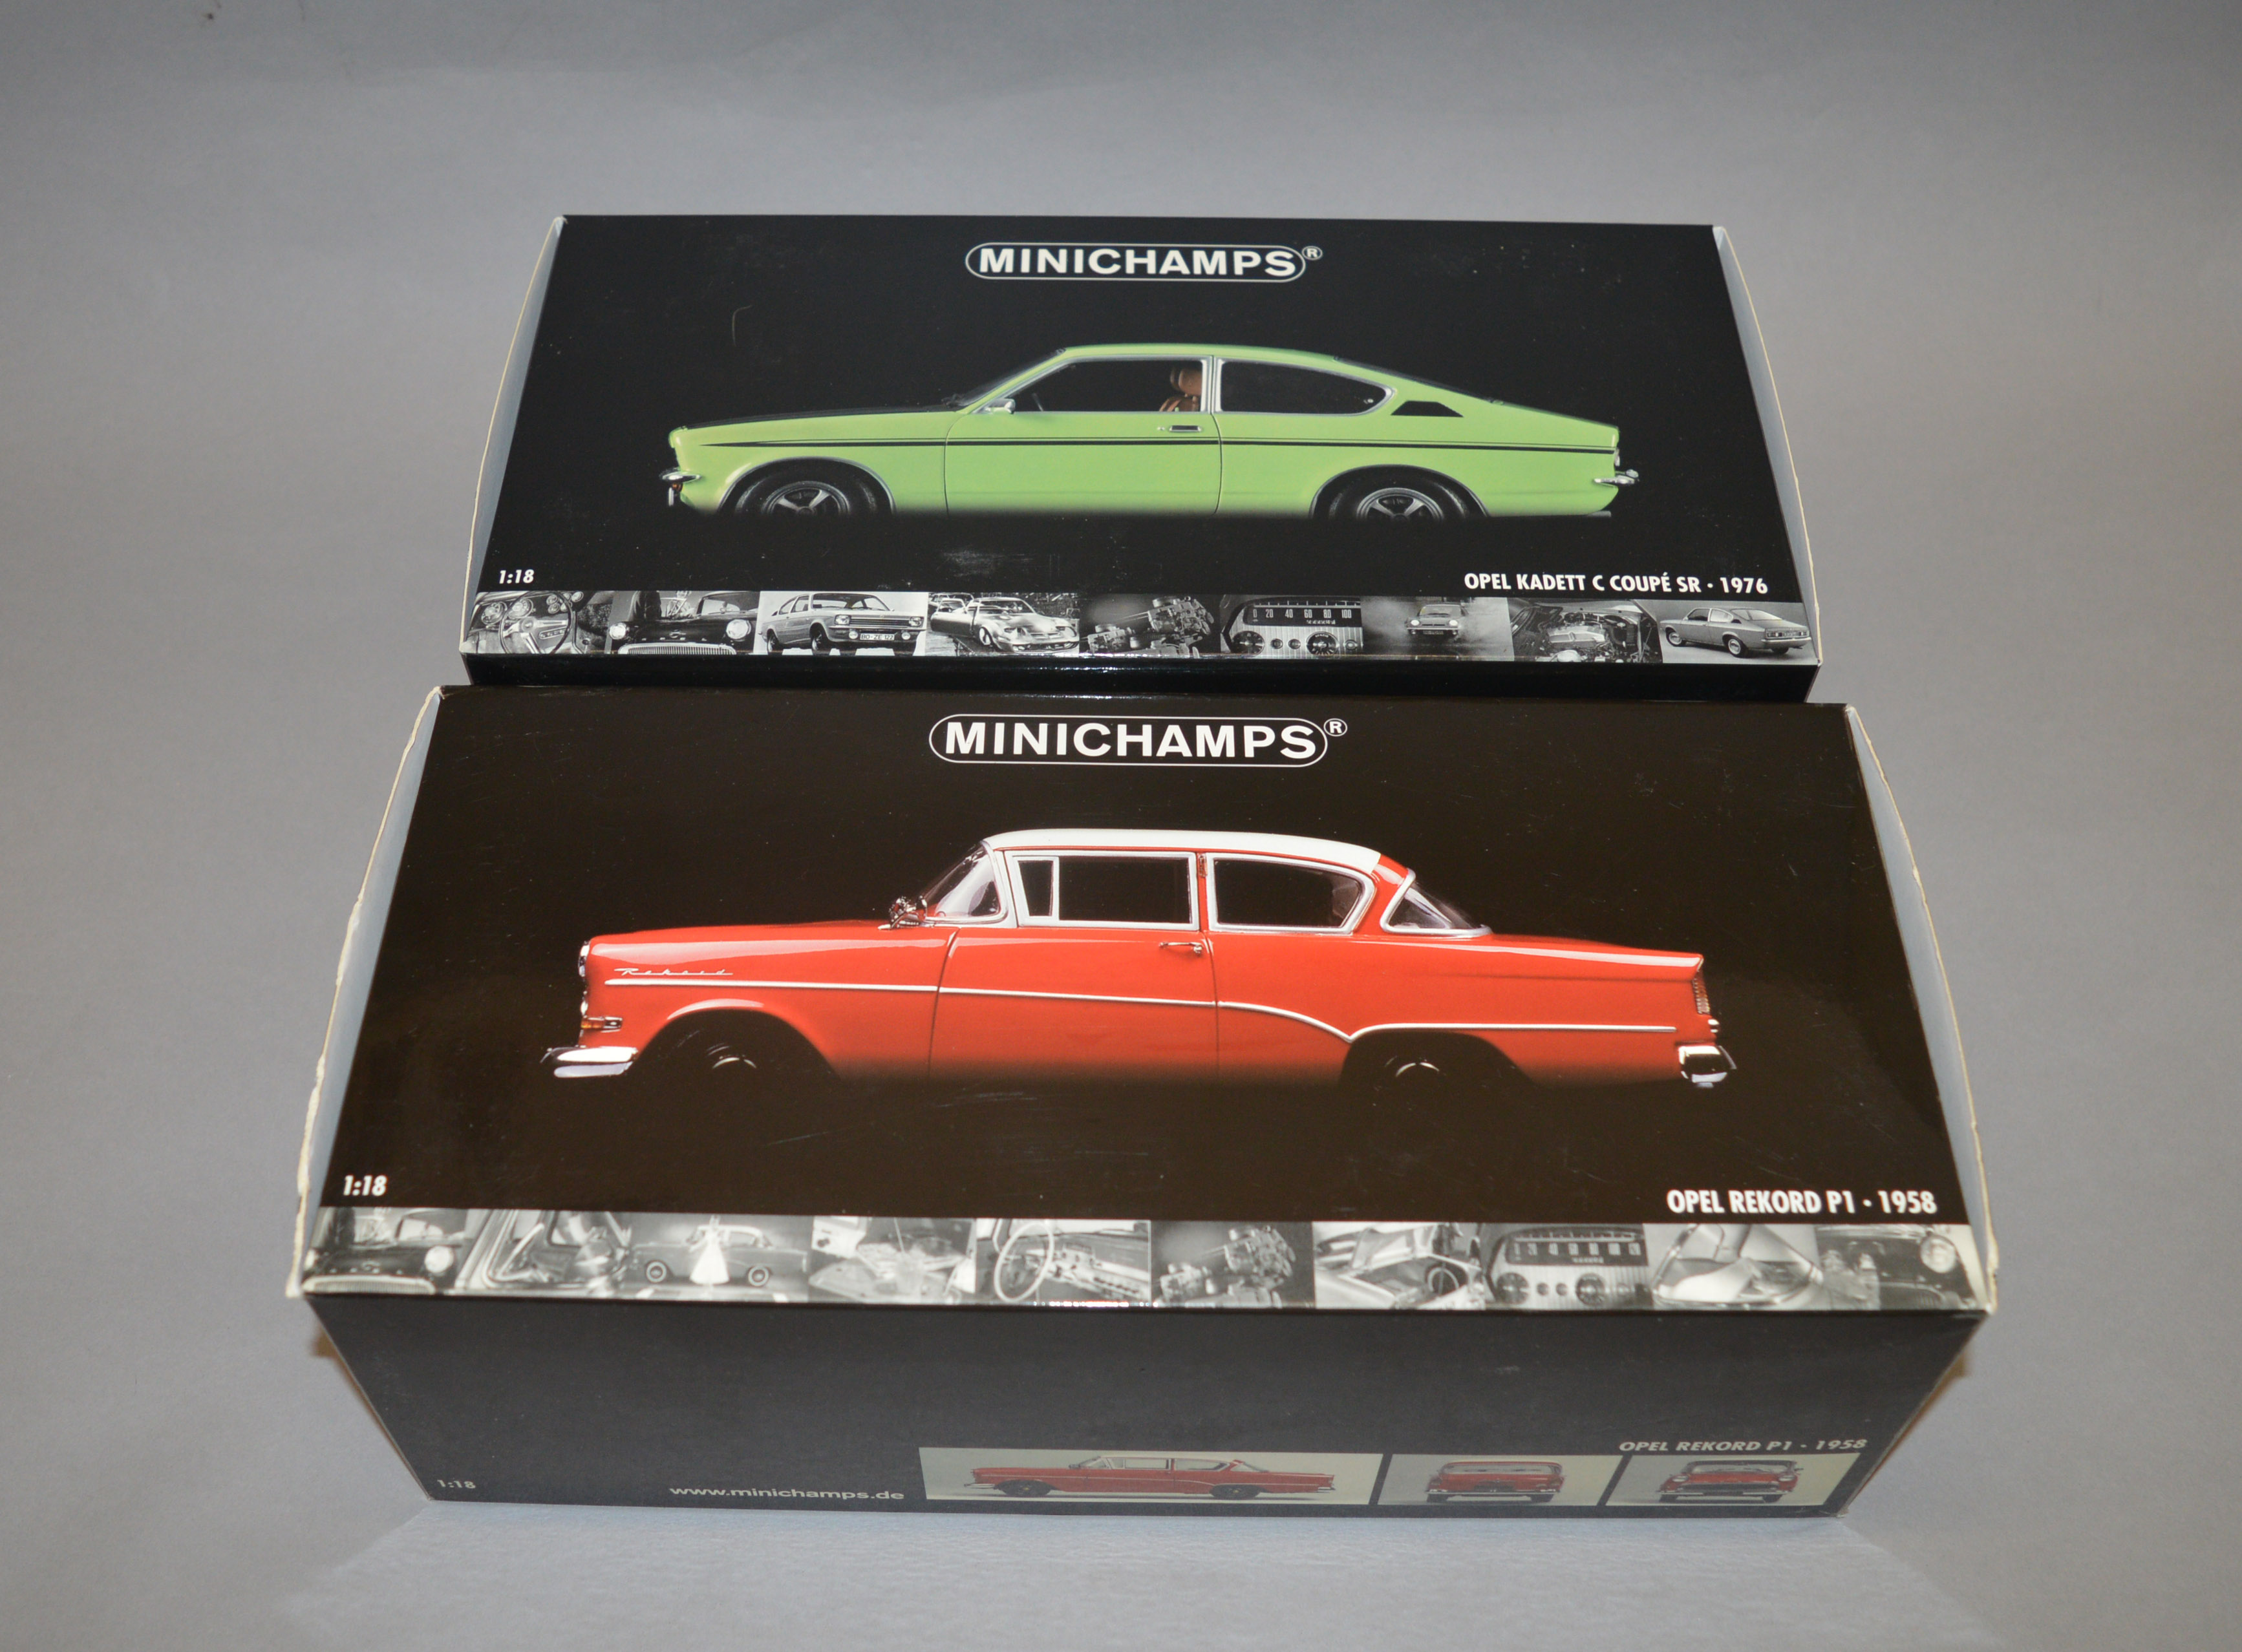 Two boxed Minichamps diecast model cars in 1:18 scale,